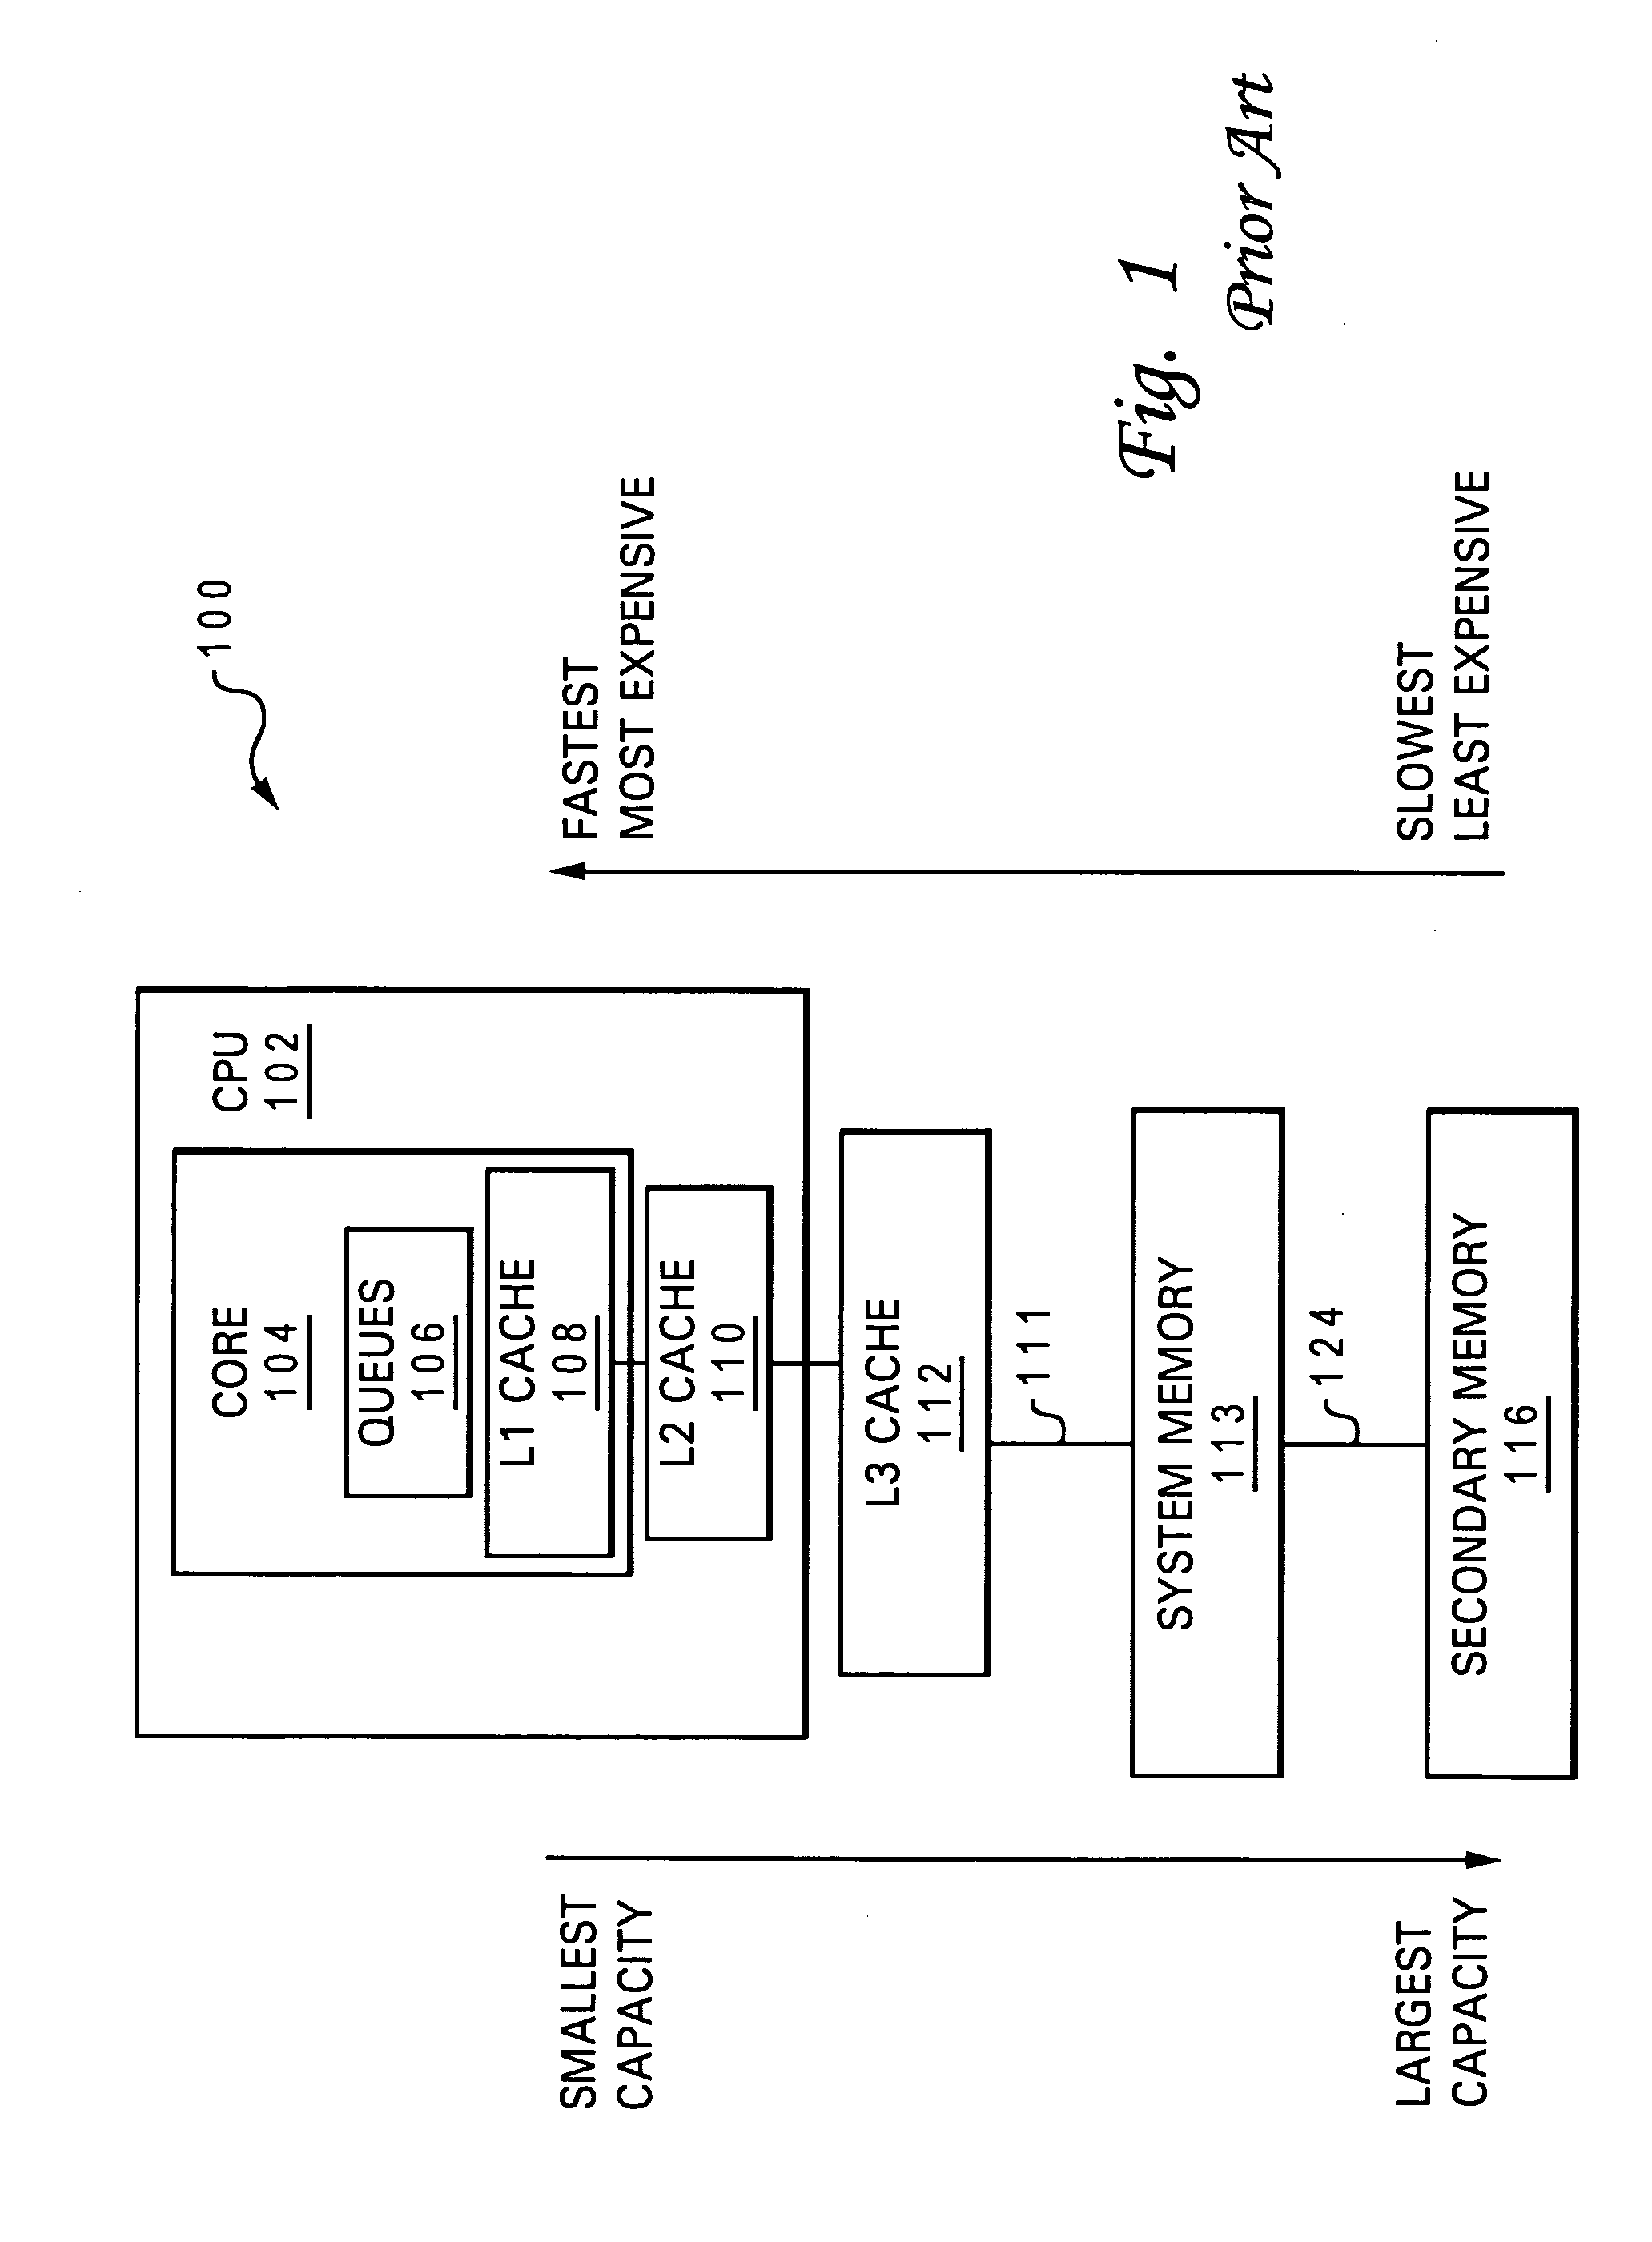 Speculative data streaming disk drive and system